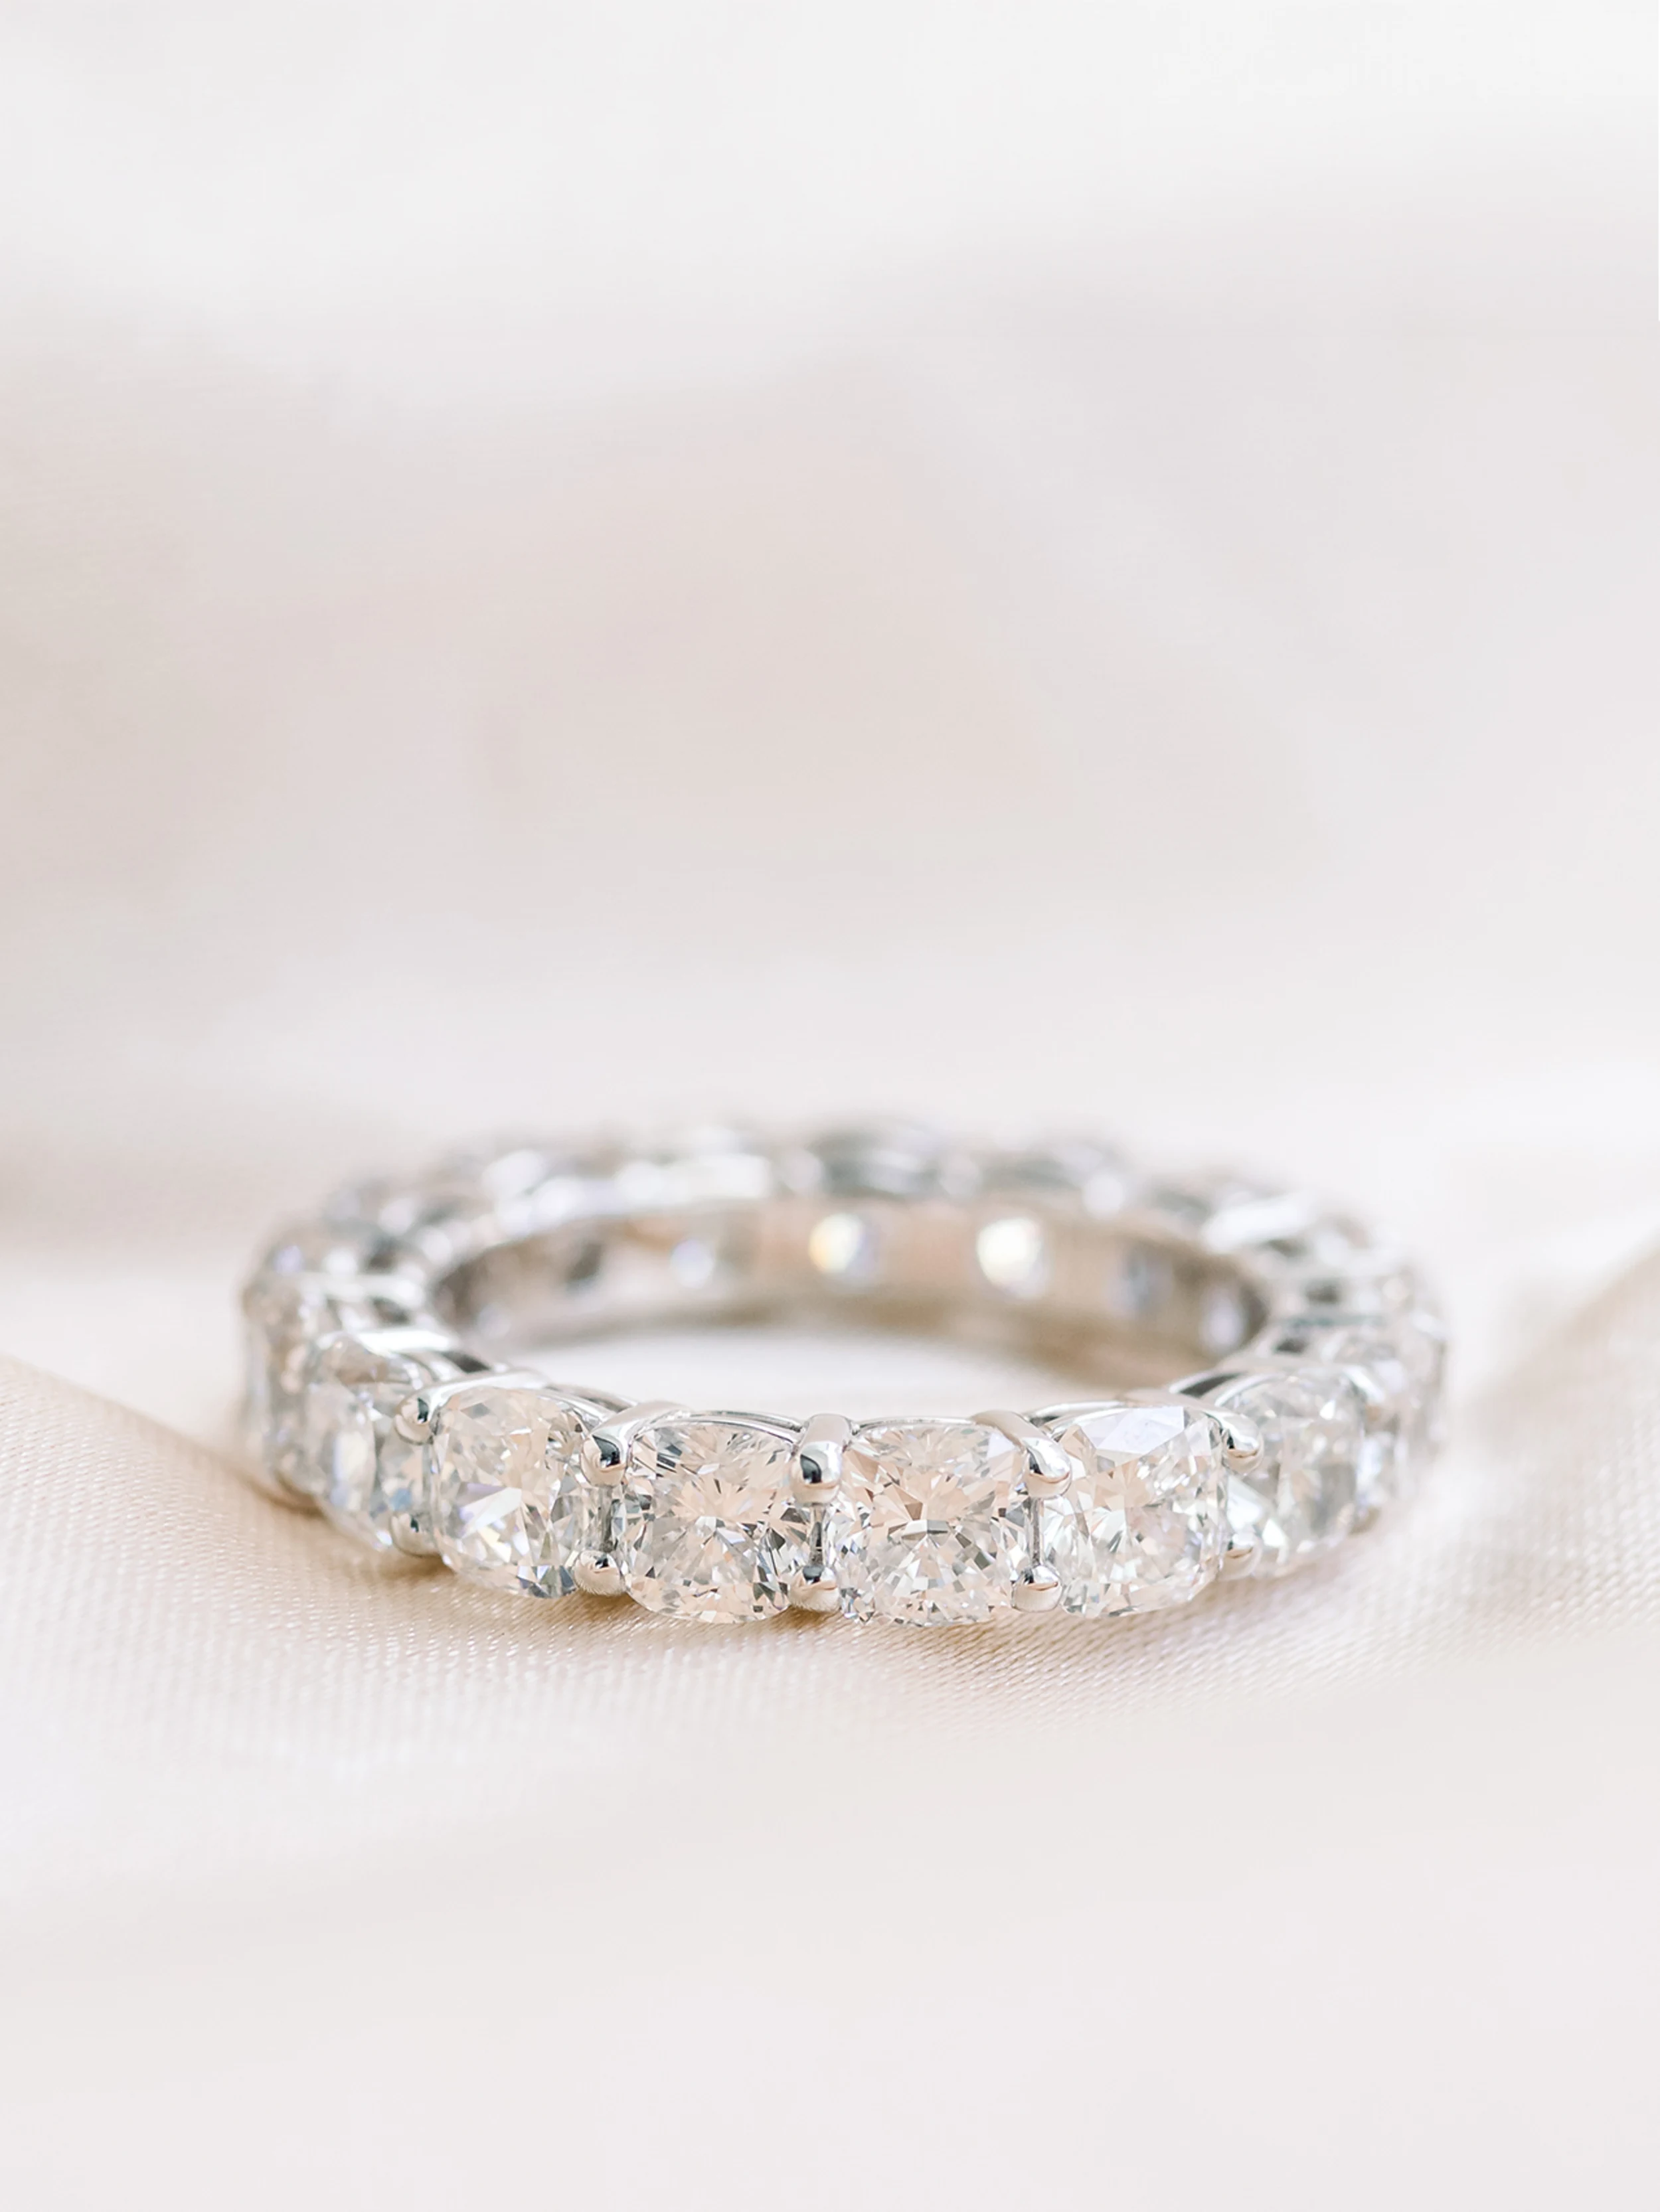 Cushion Eternity Band featuring Lab Diamonds (Profile View)